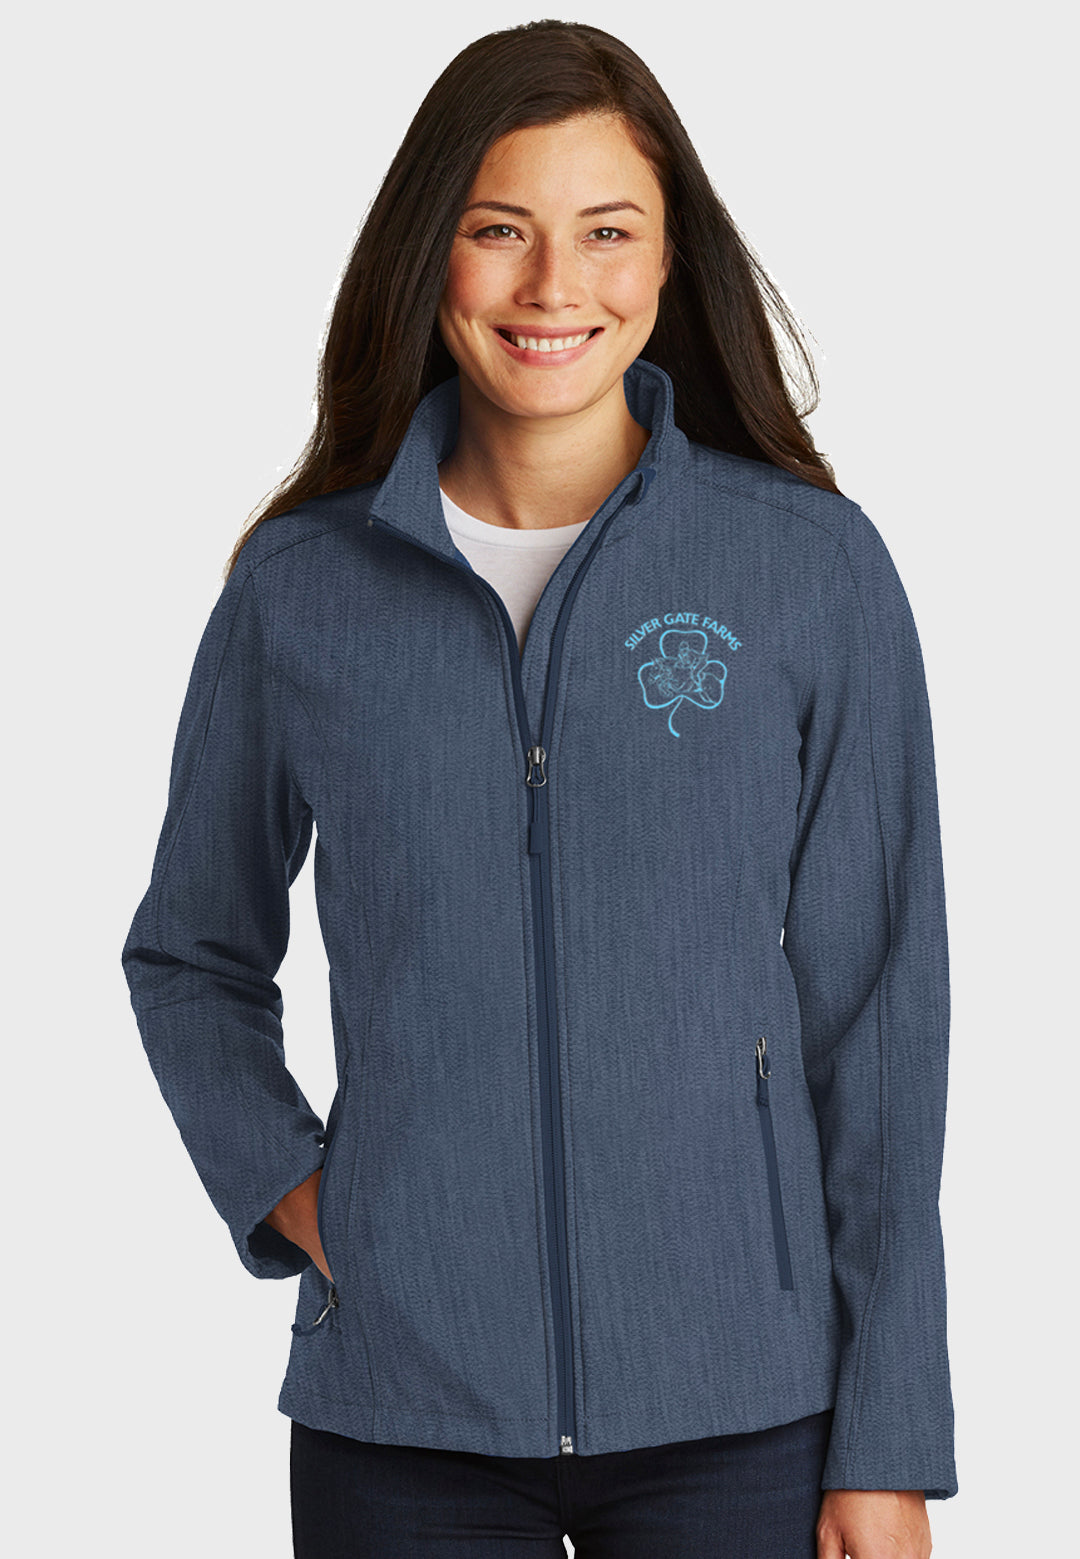 Silver Gate Farms Port Authority® Ladies Core Soft Shell Jacket - Navy Heather